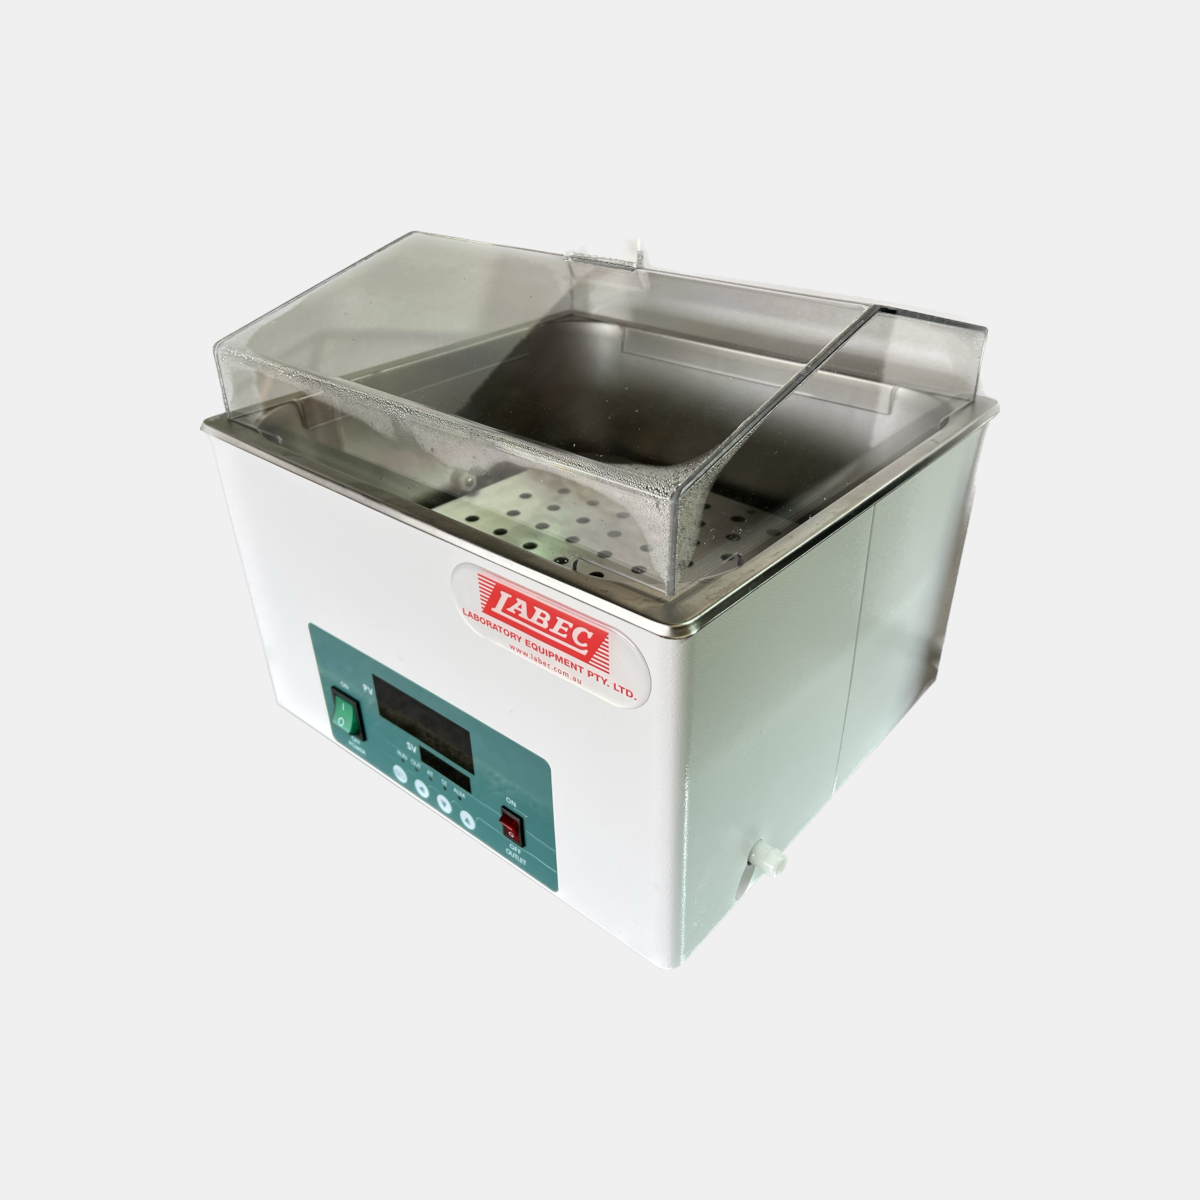 General Purpose Water Bath (up to +100ºC)